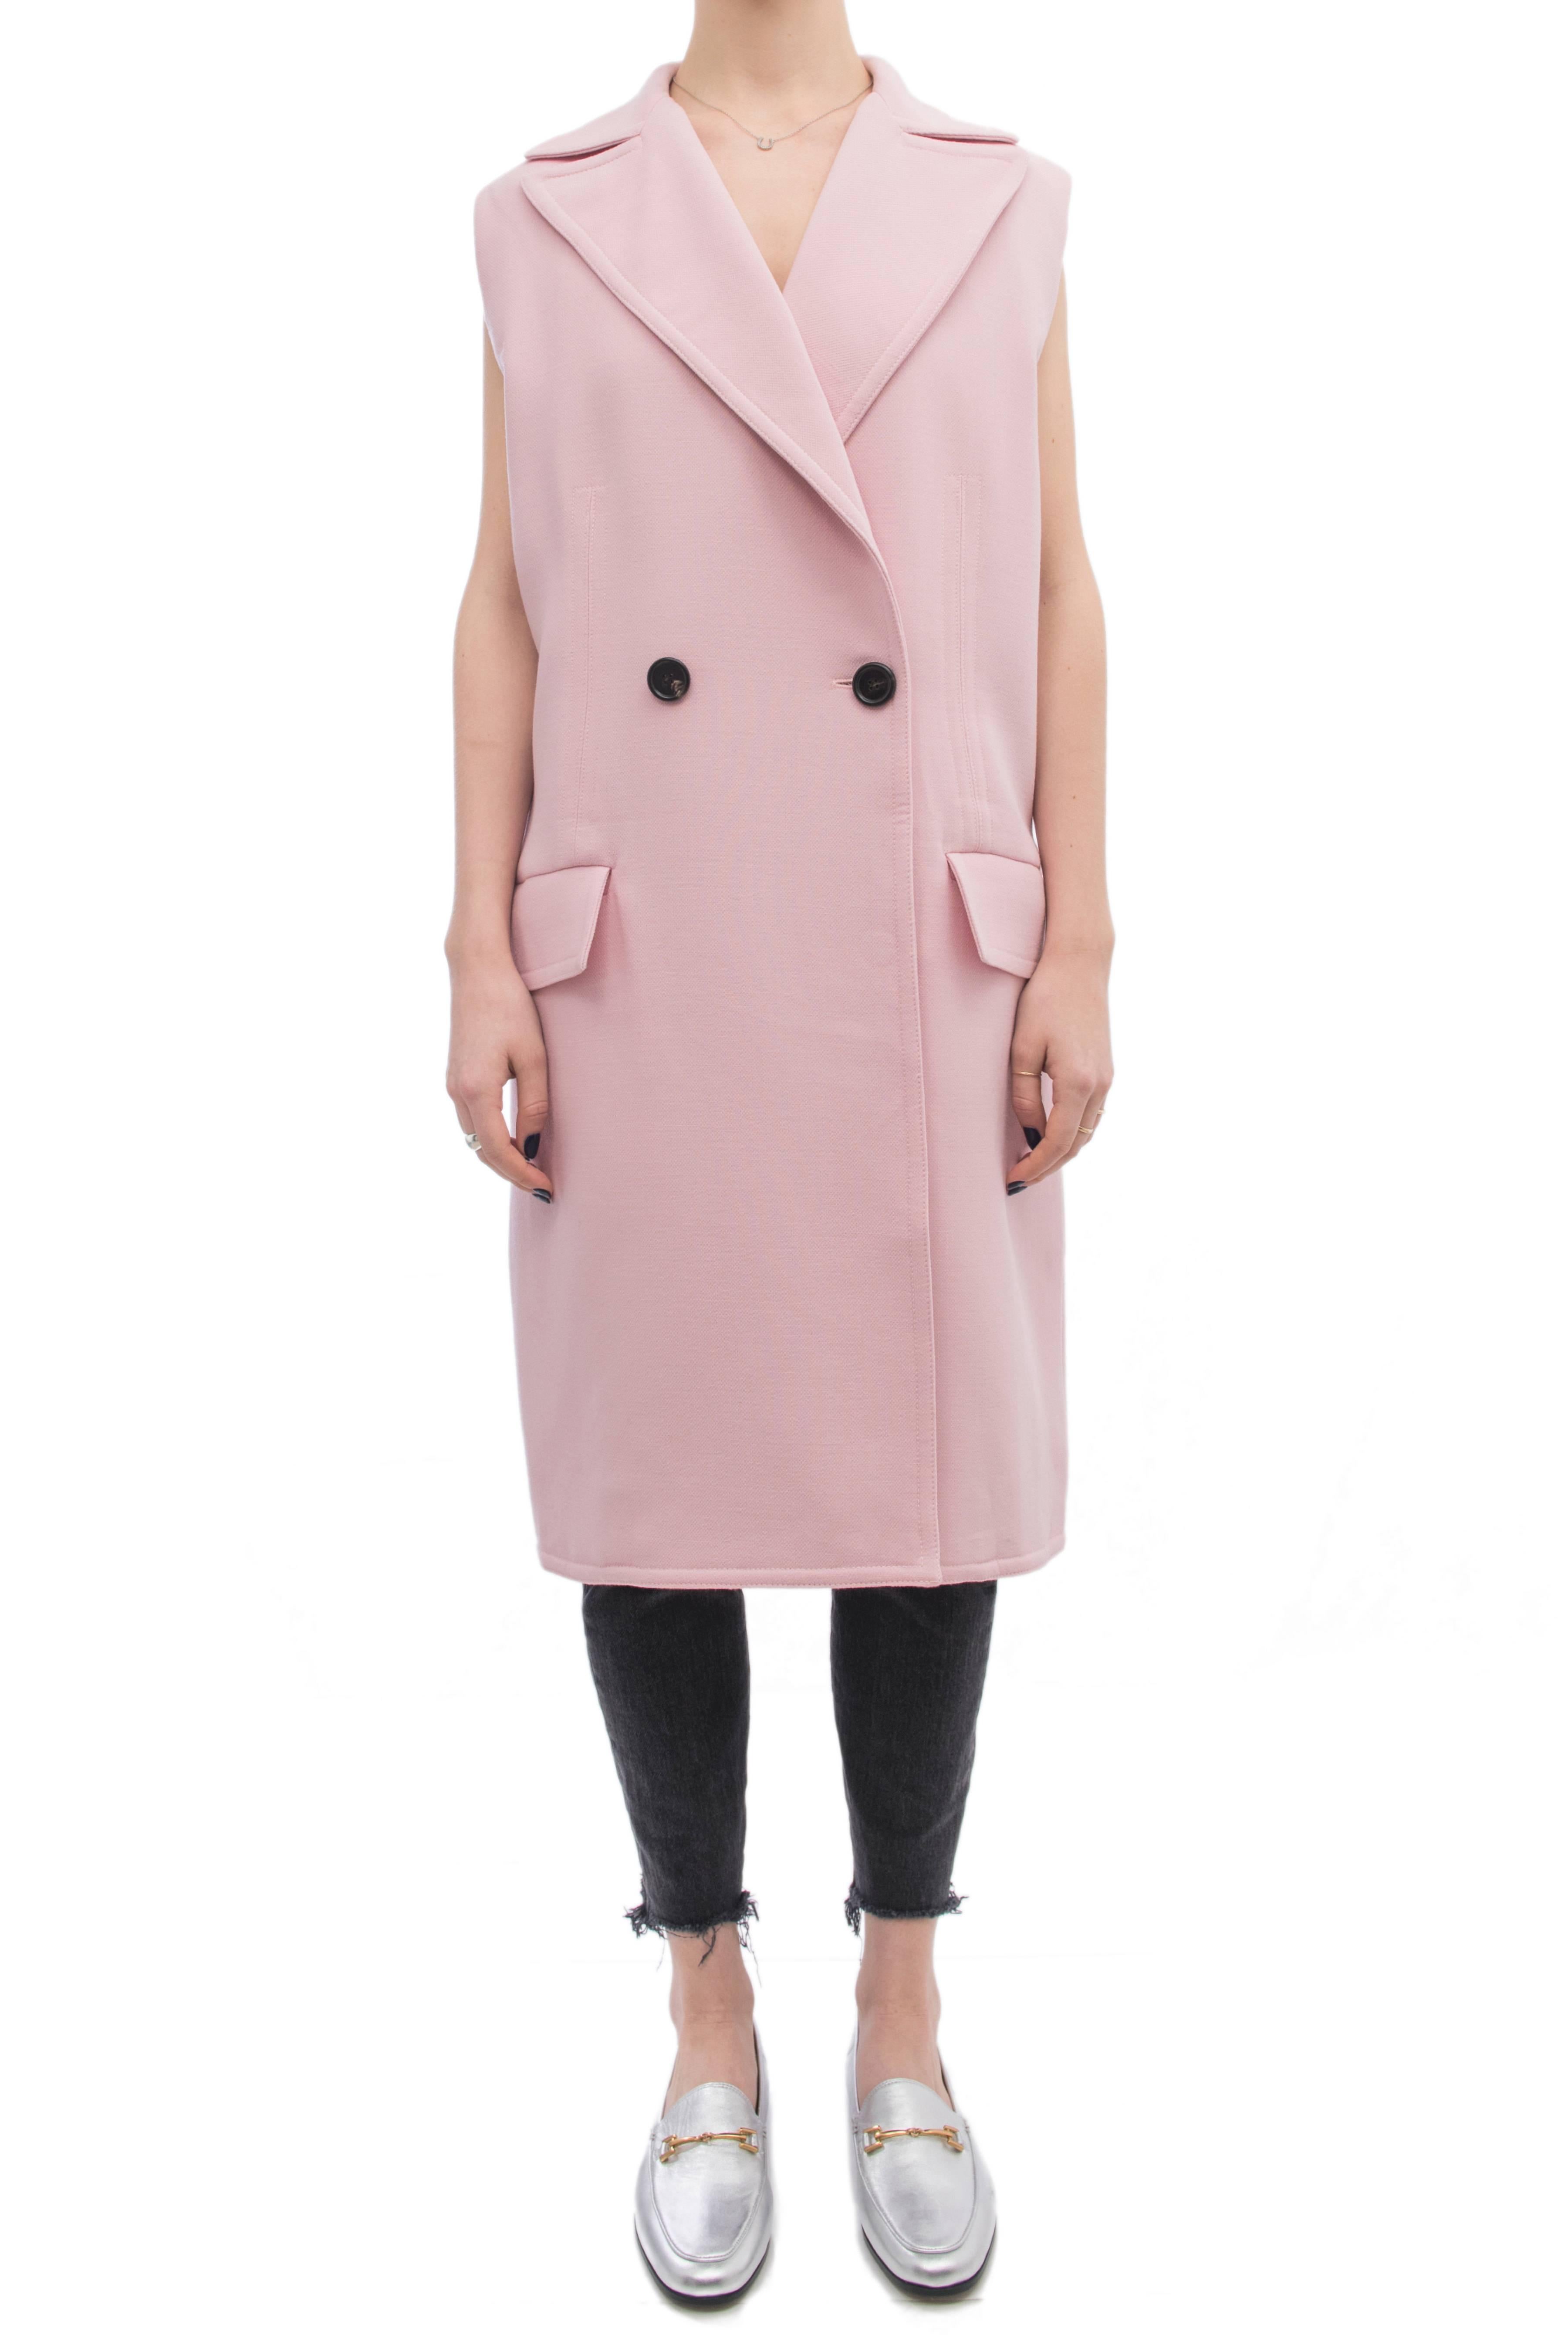 Marni pink wool long coat vest.  Side hip pockets, two font buttons, notched collar.  Marked size IT 38 (USA 6). This garment is designed to be worn very oversized so can fit a USA 8/10 as well.  Garment measures 46” at bust and hip.  Back neck seam